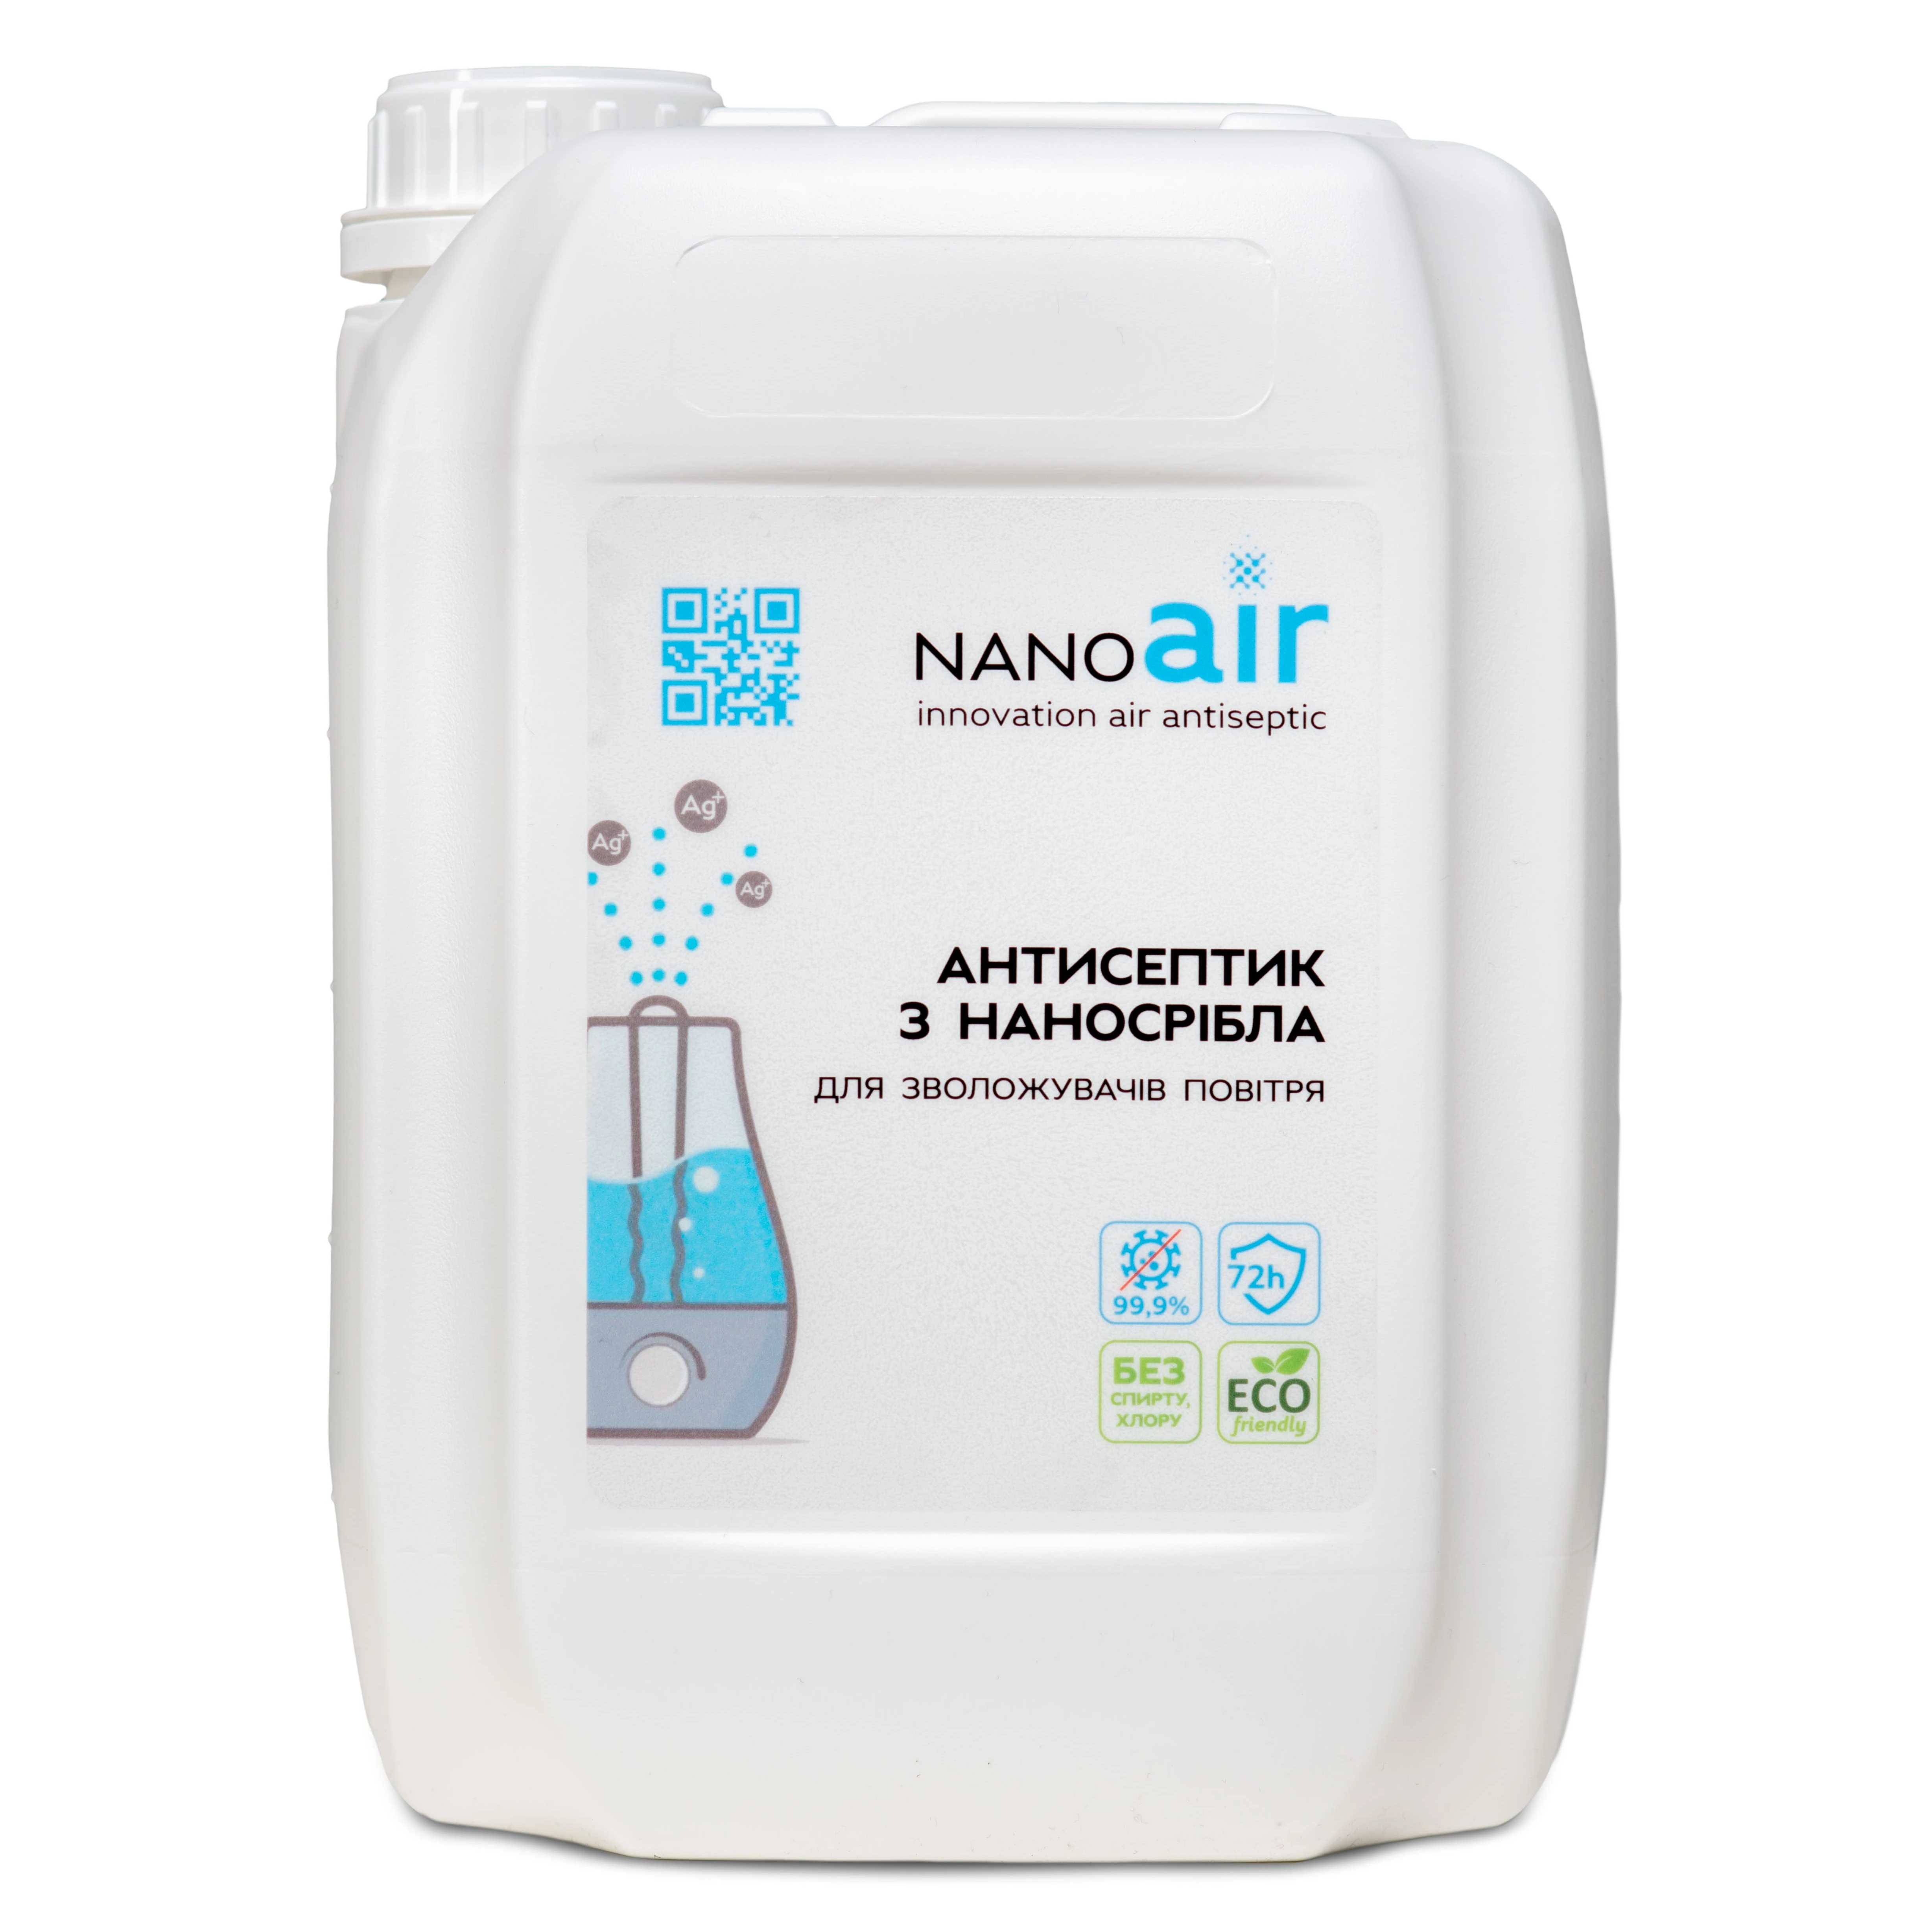 NANOAIR Antiseptic for humidifiers 5 L   Argentis NANO